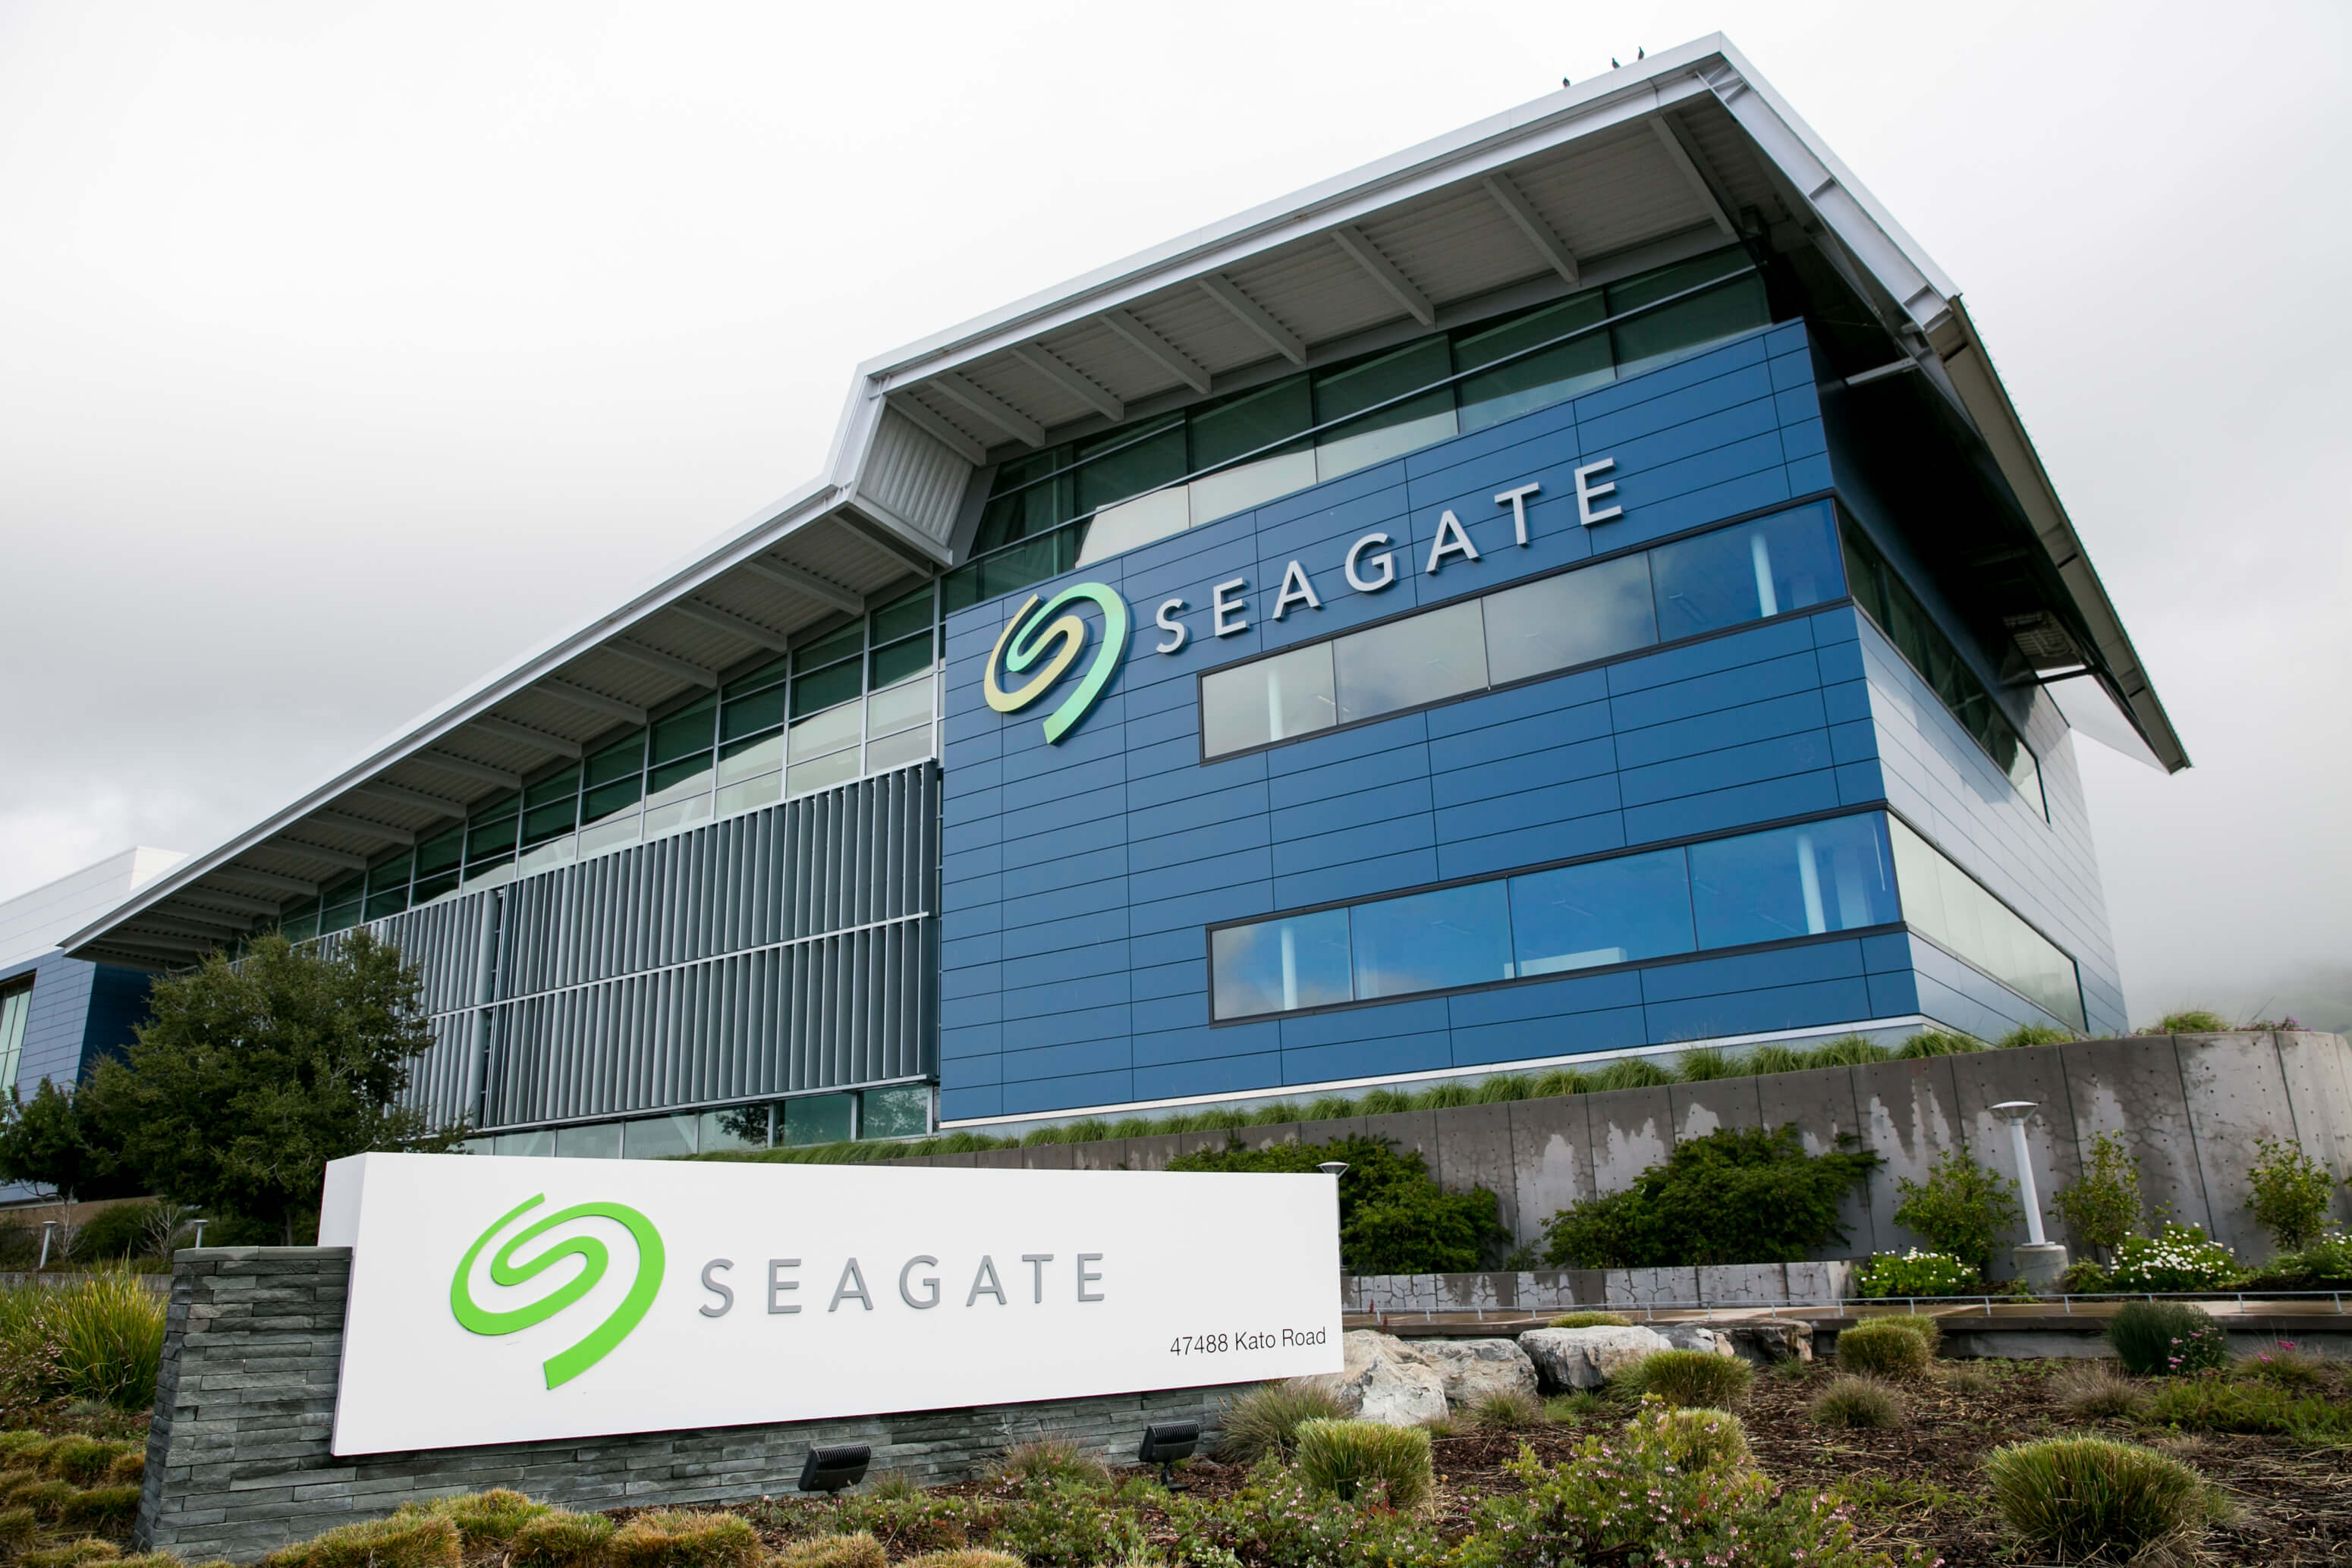 Seagate reveals storage roadmap showing 20TB drives by 2020